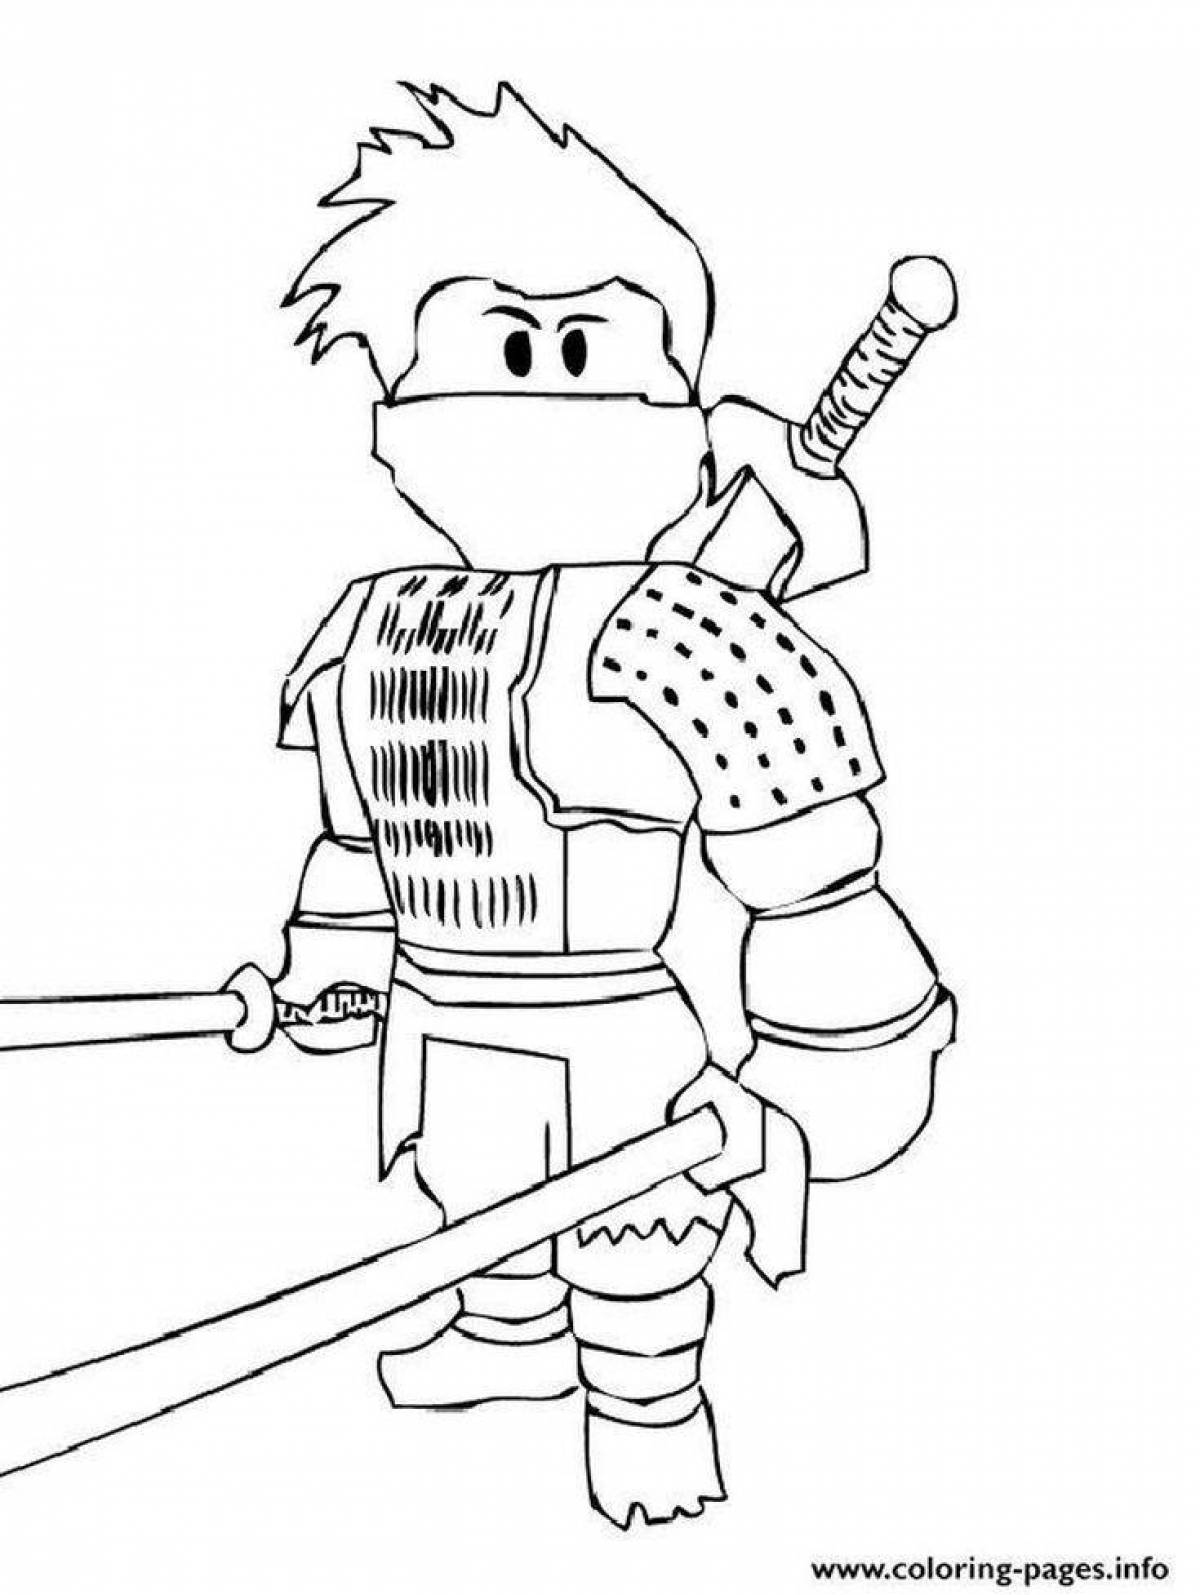 Roblox coloring book for boys